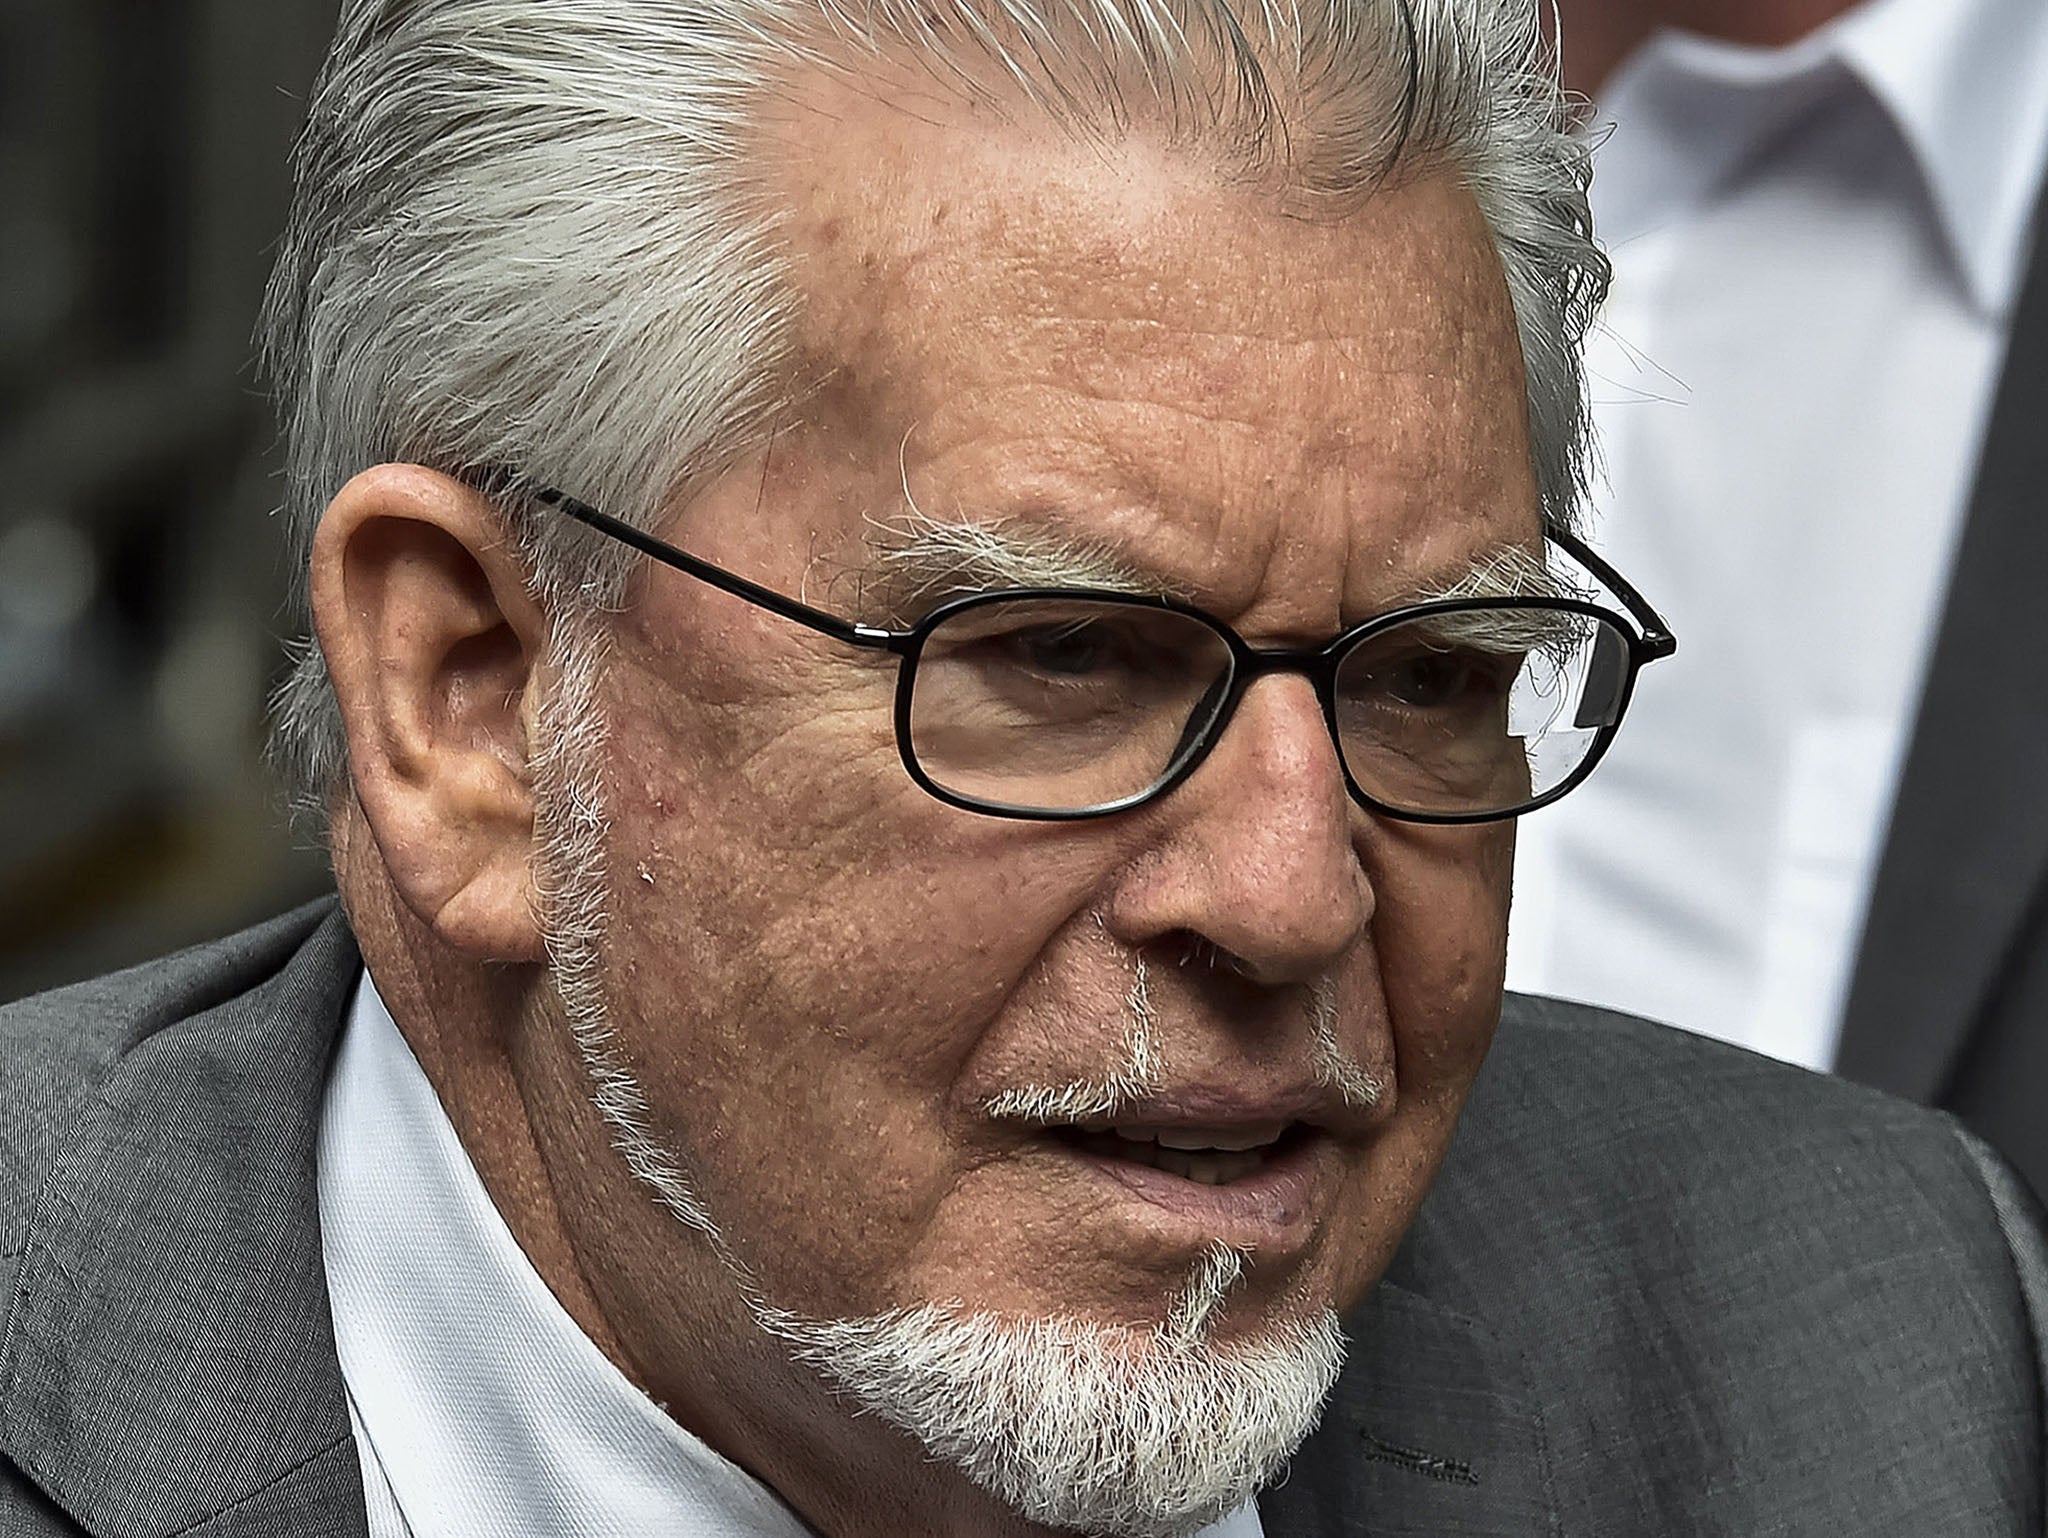 Rolf Harris arrives at Southwark Crown Court in central London on 4 July